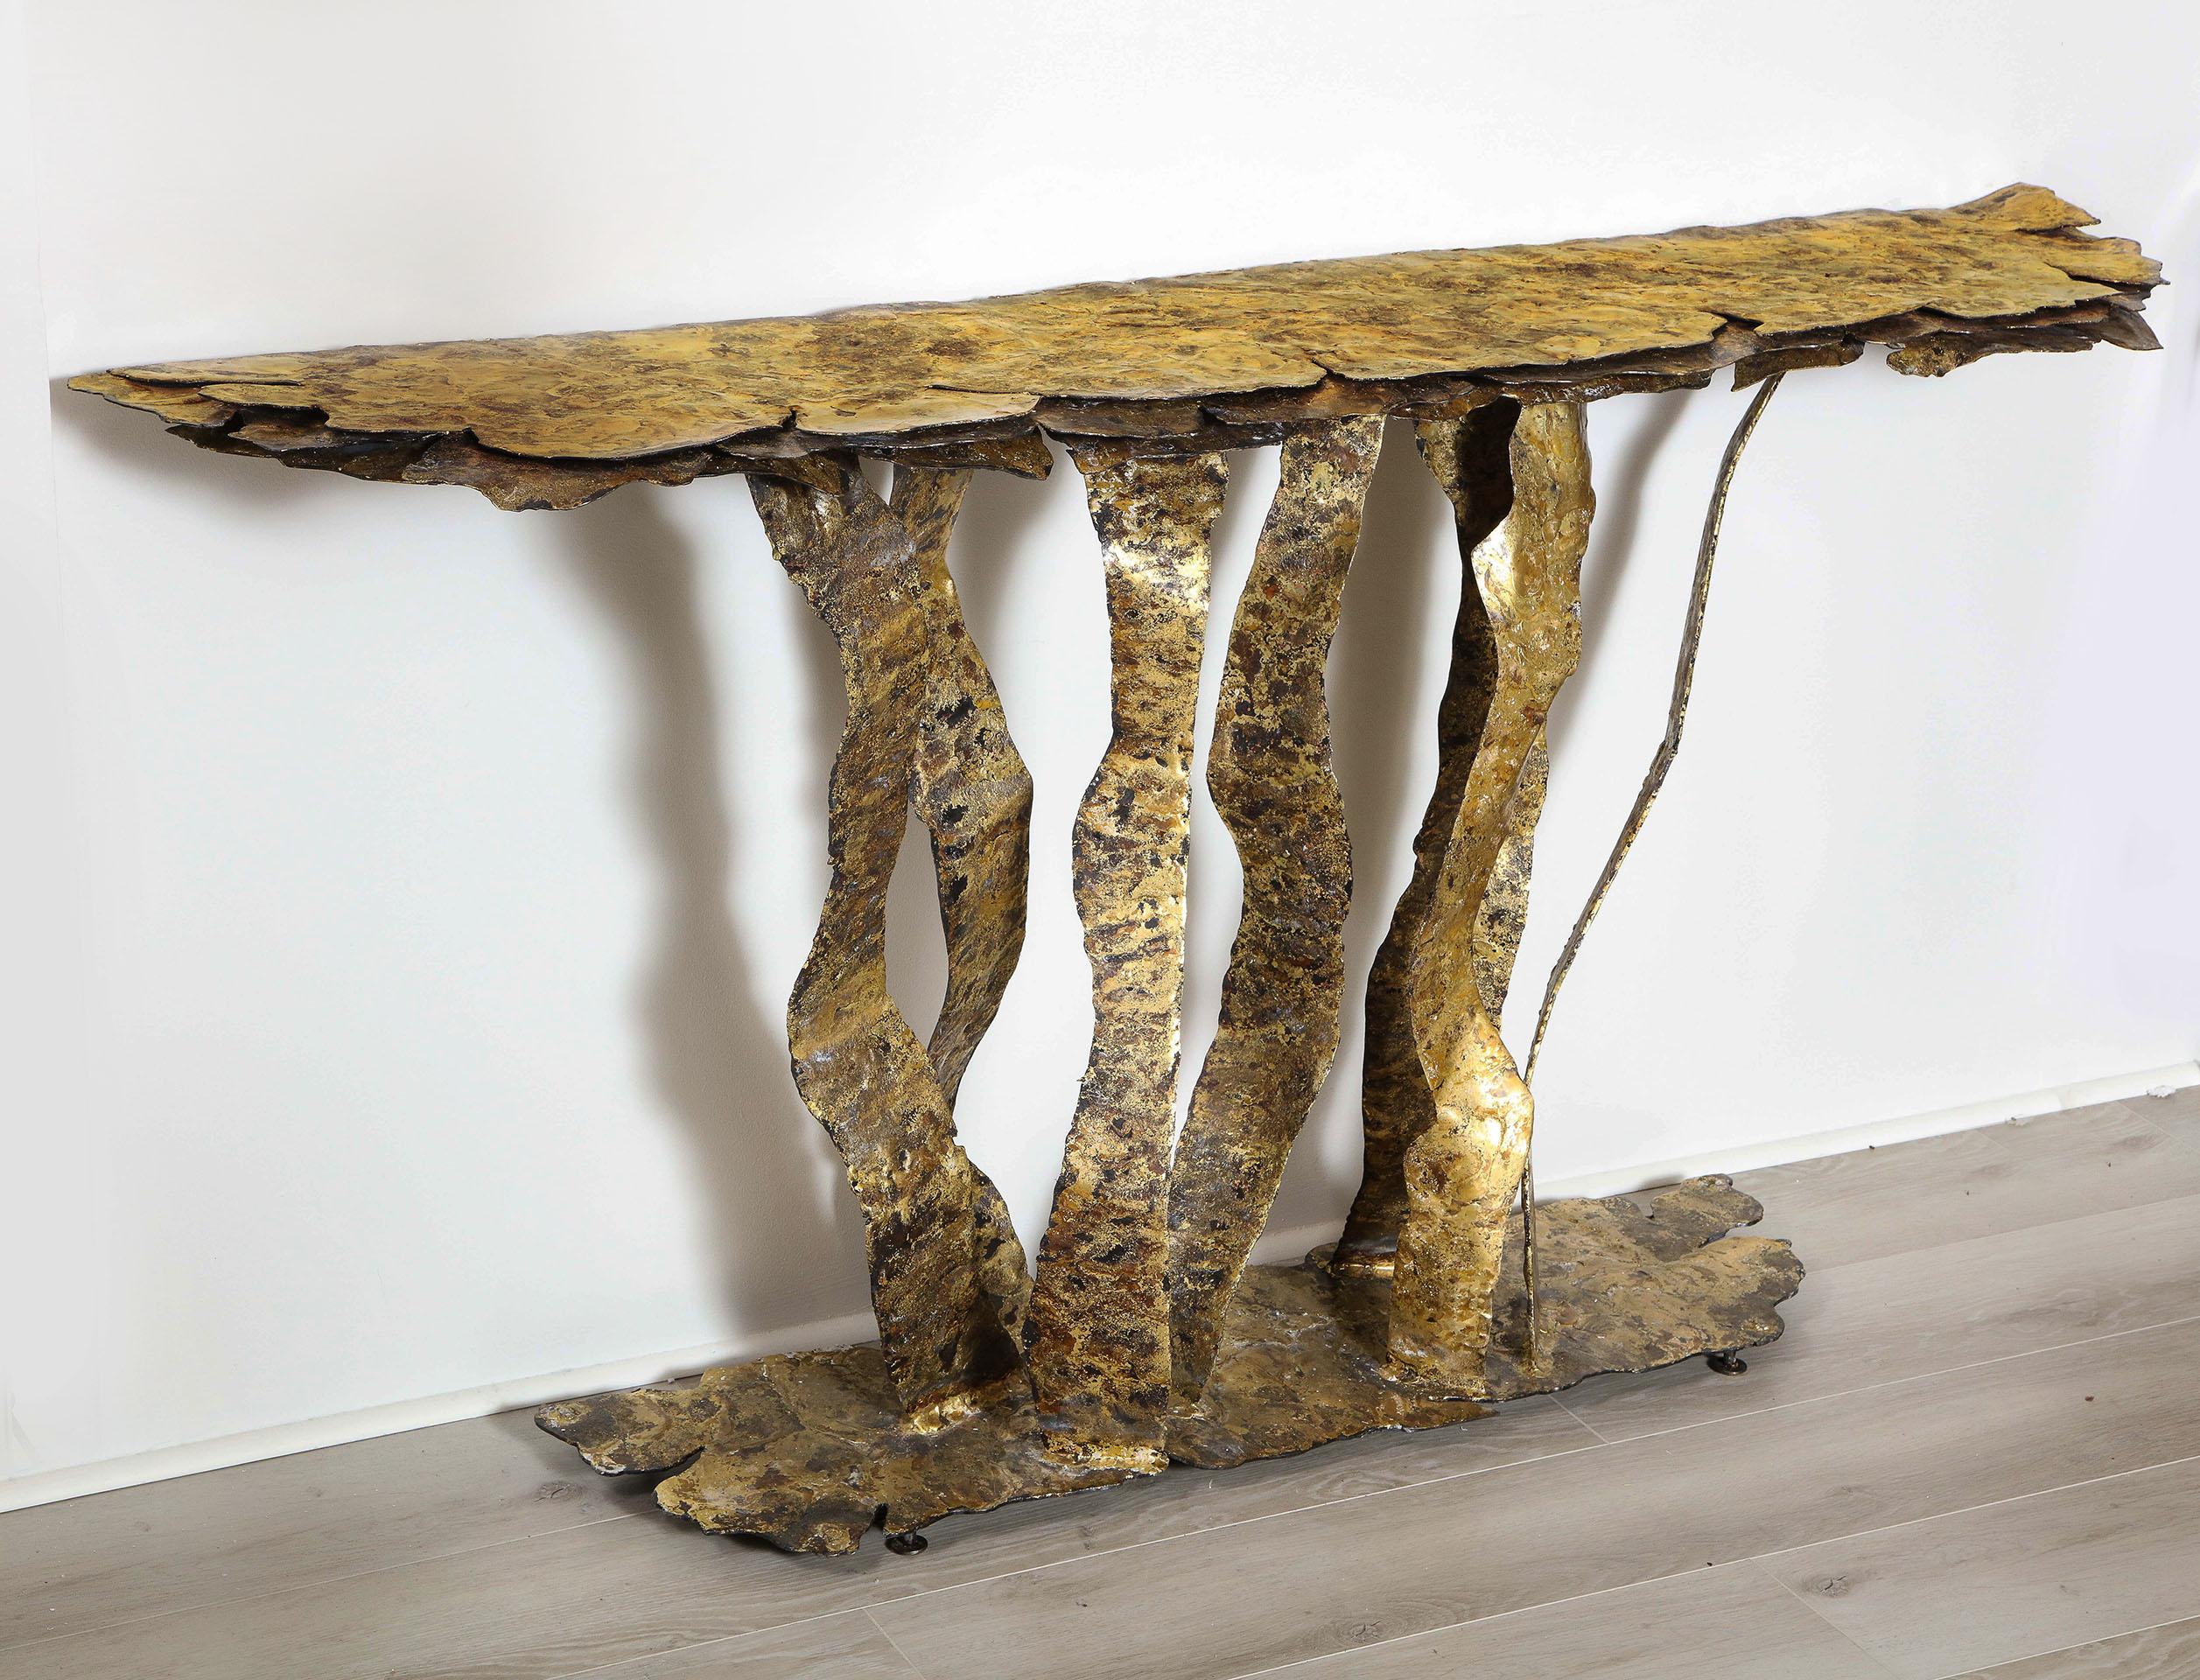 This superb and rare console table created on multiple layers of bronze on steel with an antique patina.
Signed Silas Seandel.